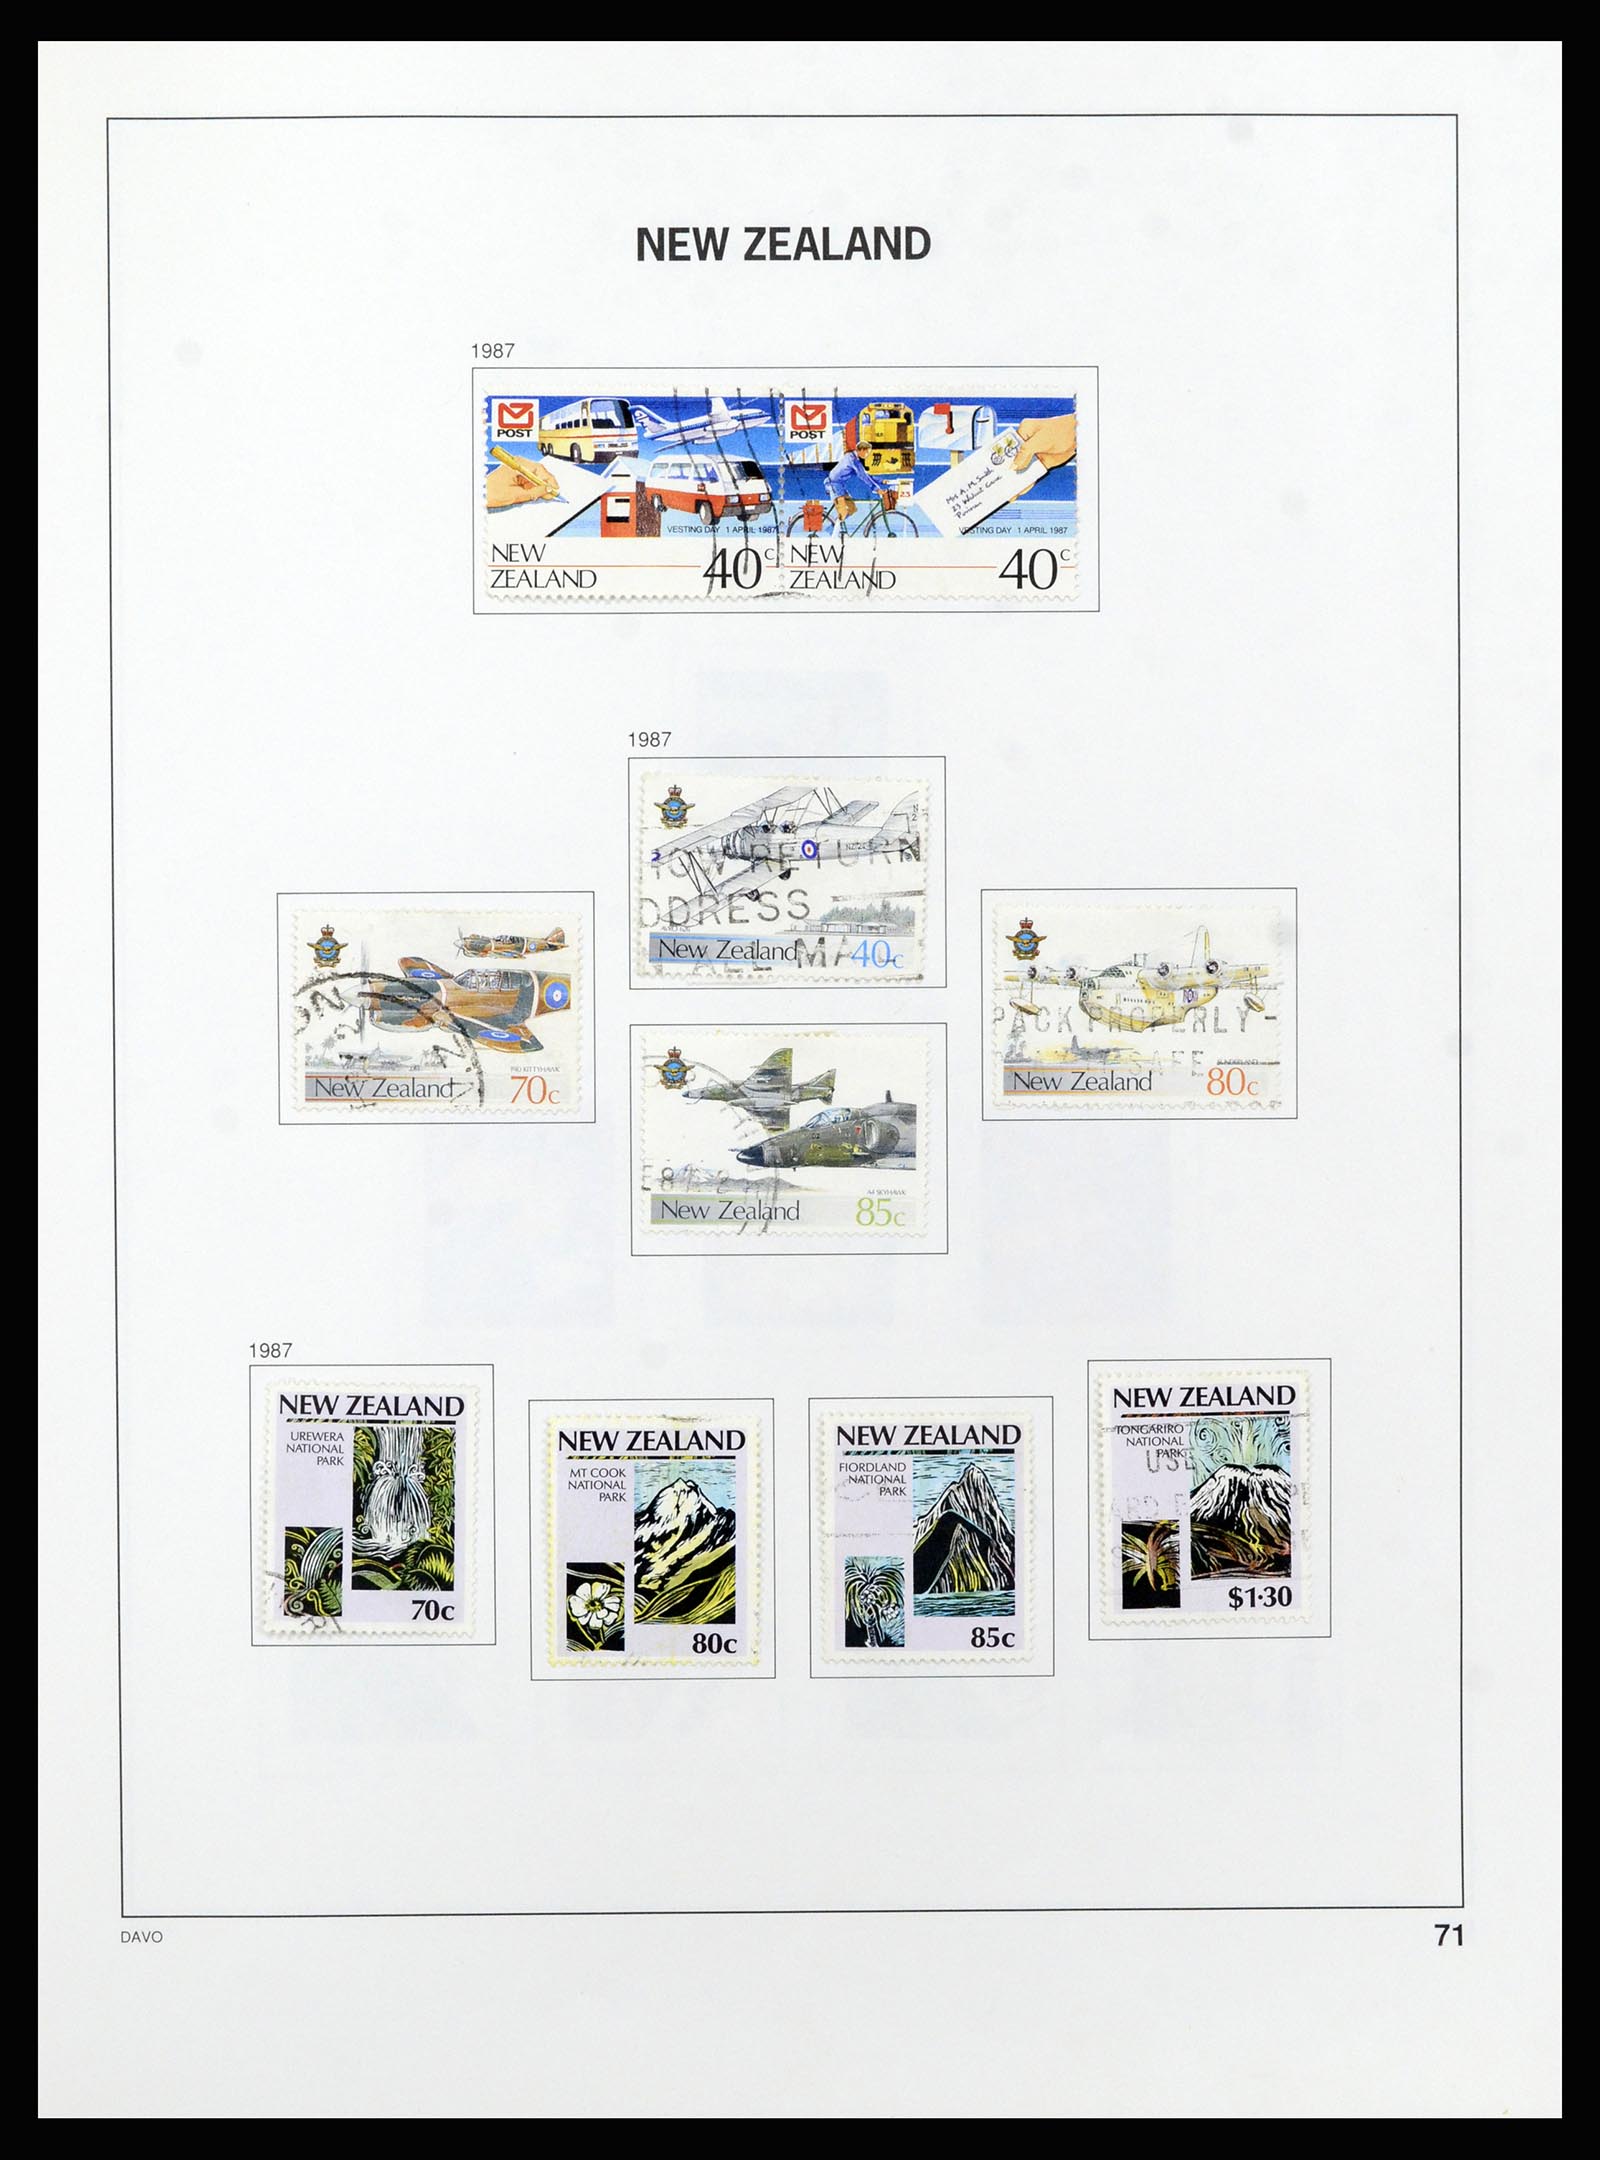 37209 072 - Stamp collection 37209 New Zealand 1855-1997.